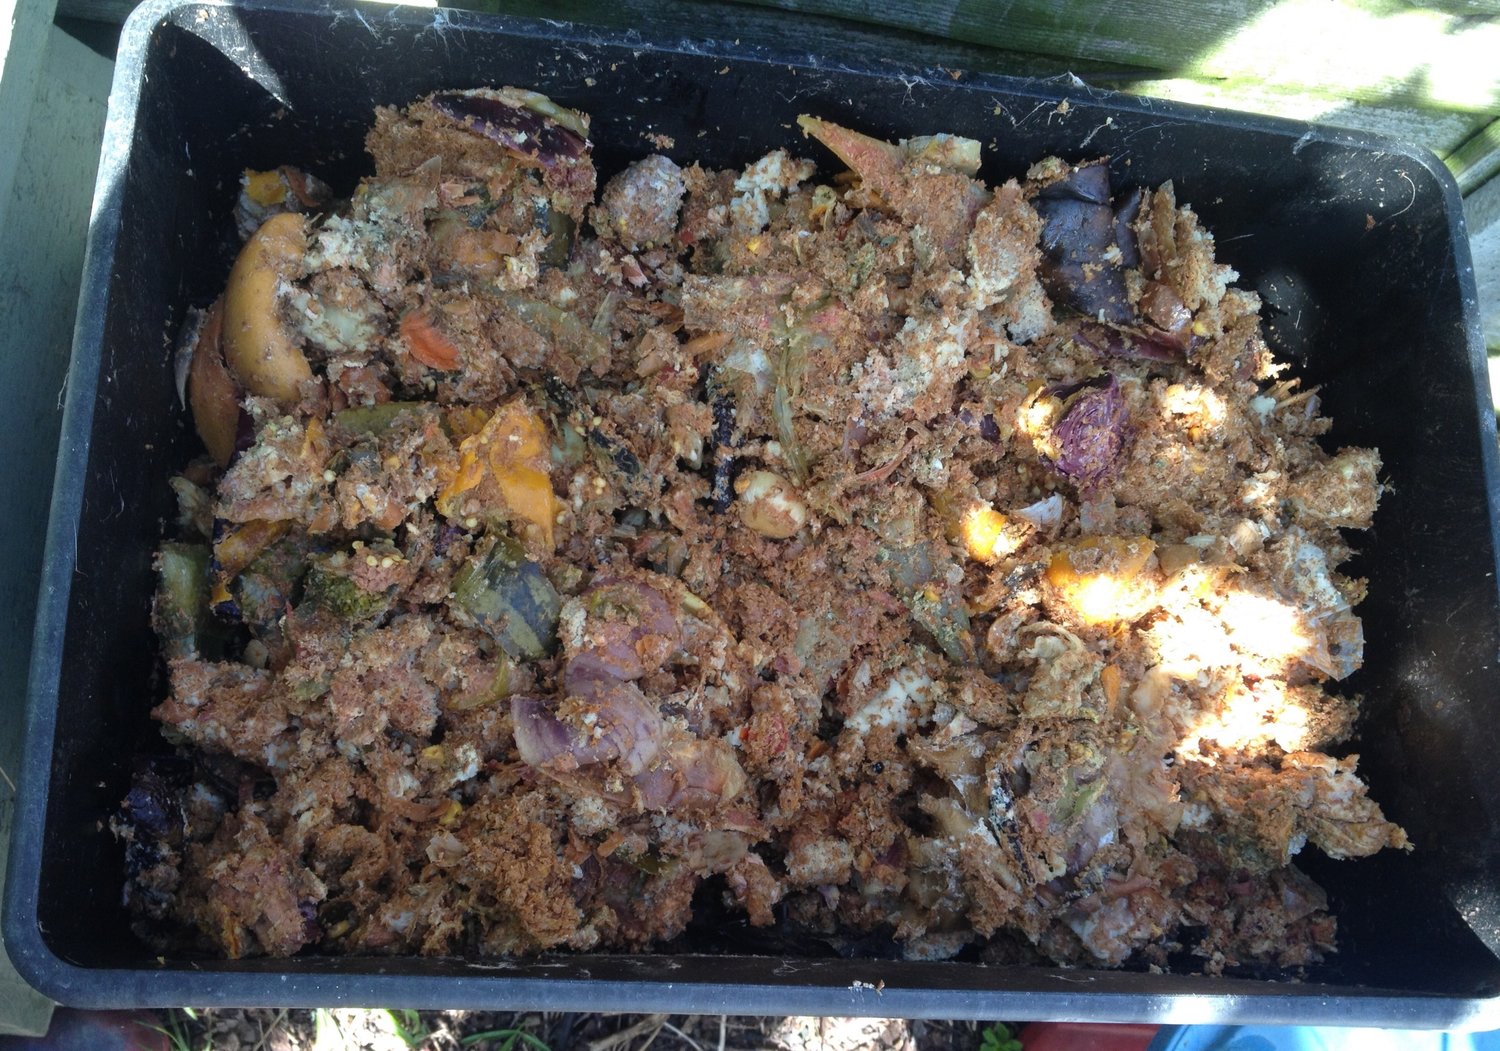 Here's what the fermented bokashi waste looks like once it is ready for the next stage: in this case, it's been added to my wormery in a thin layer.